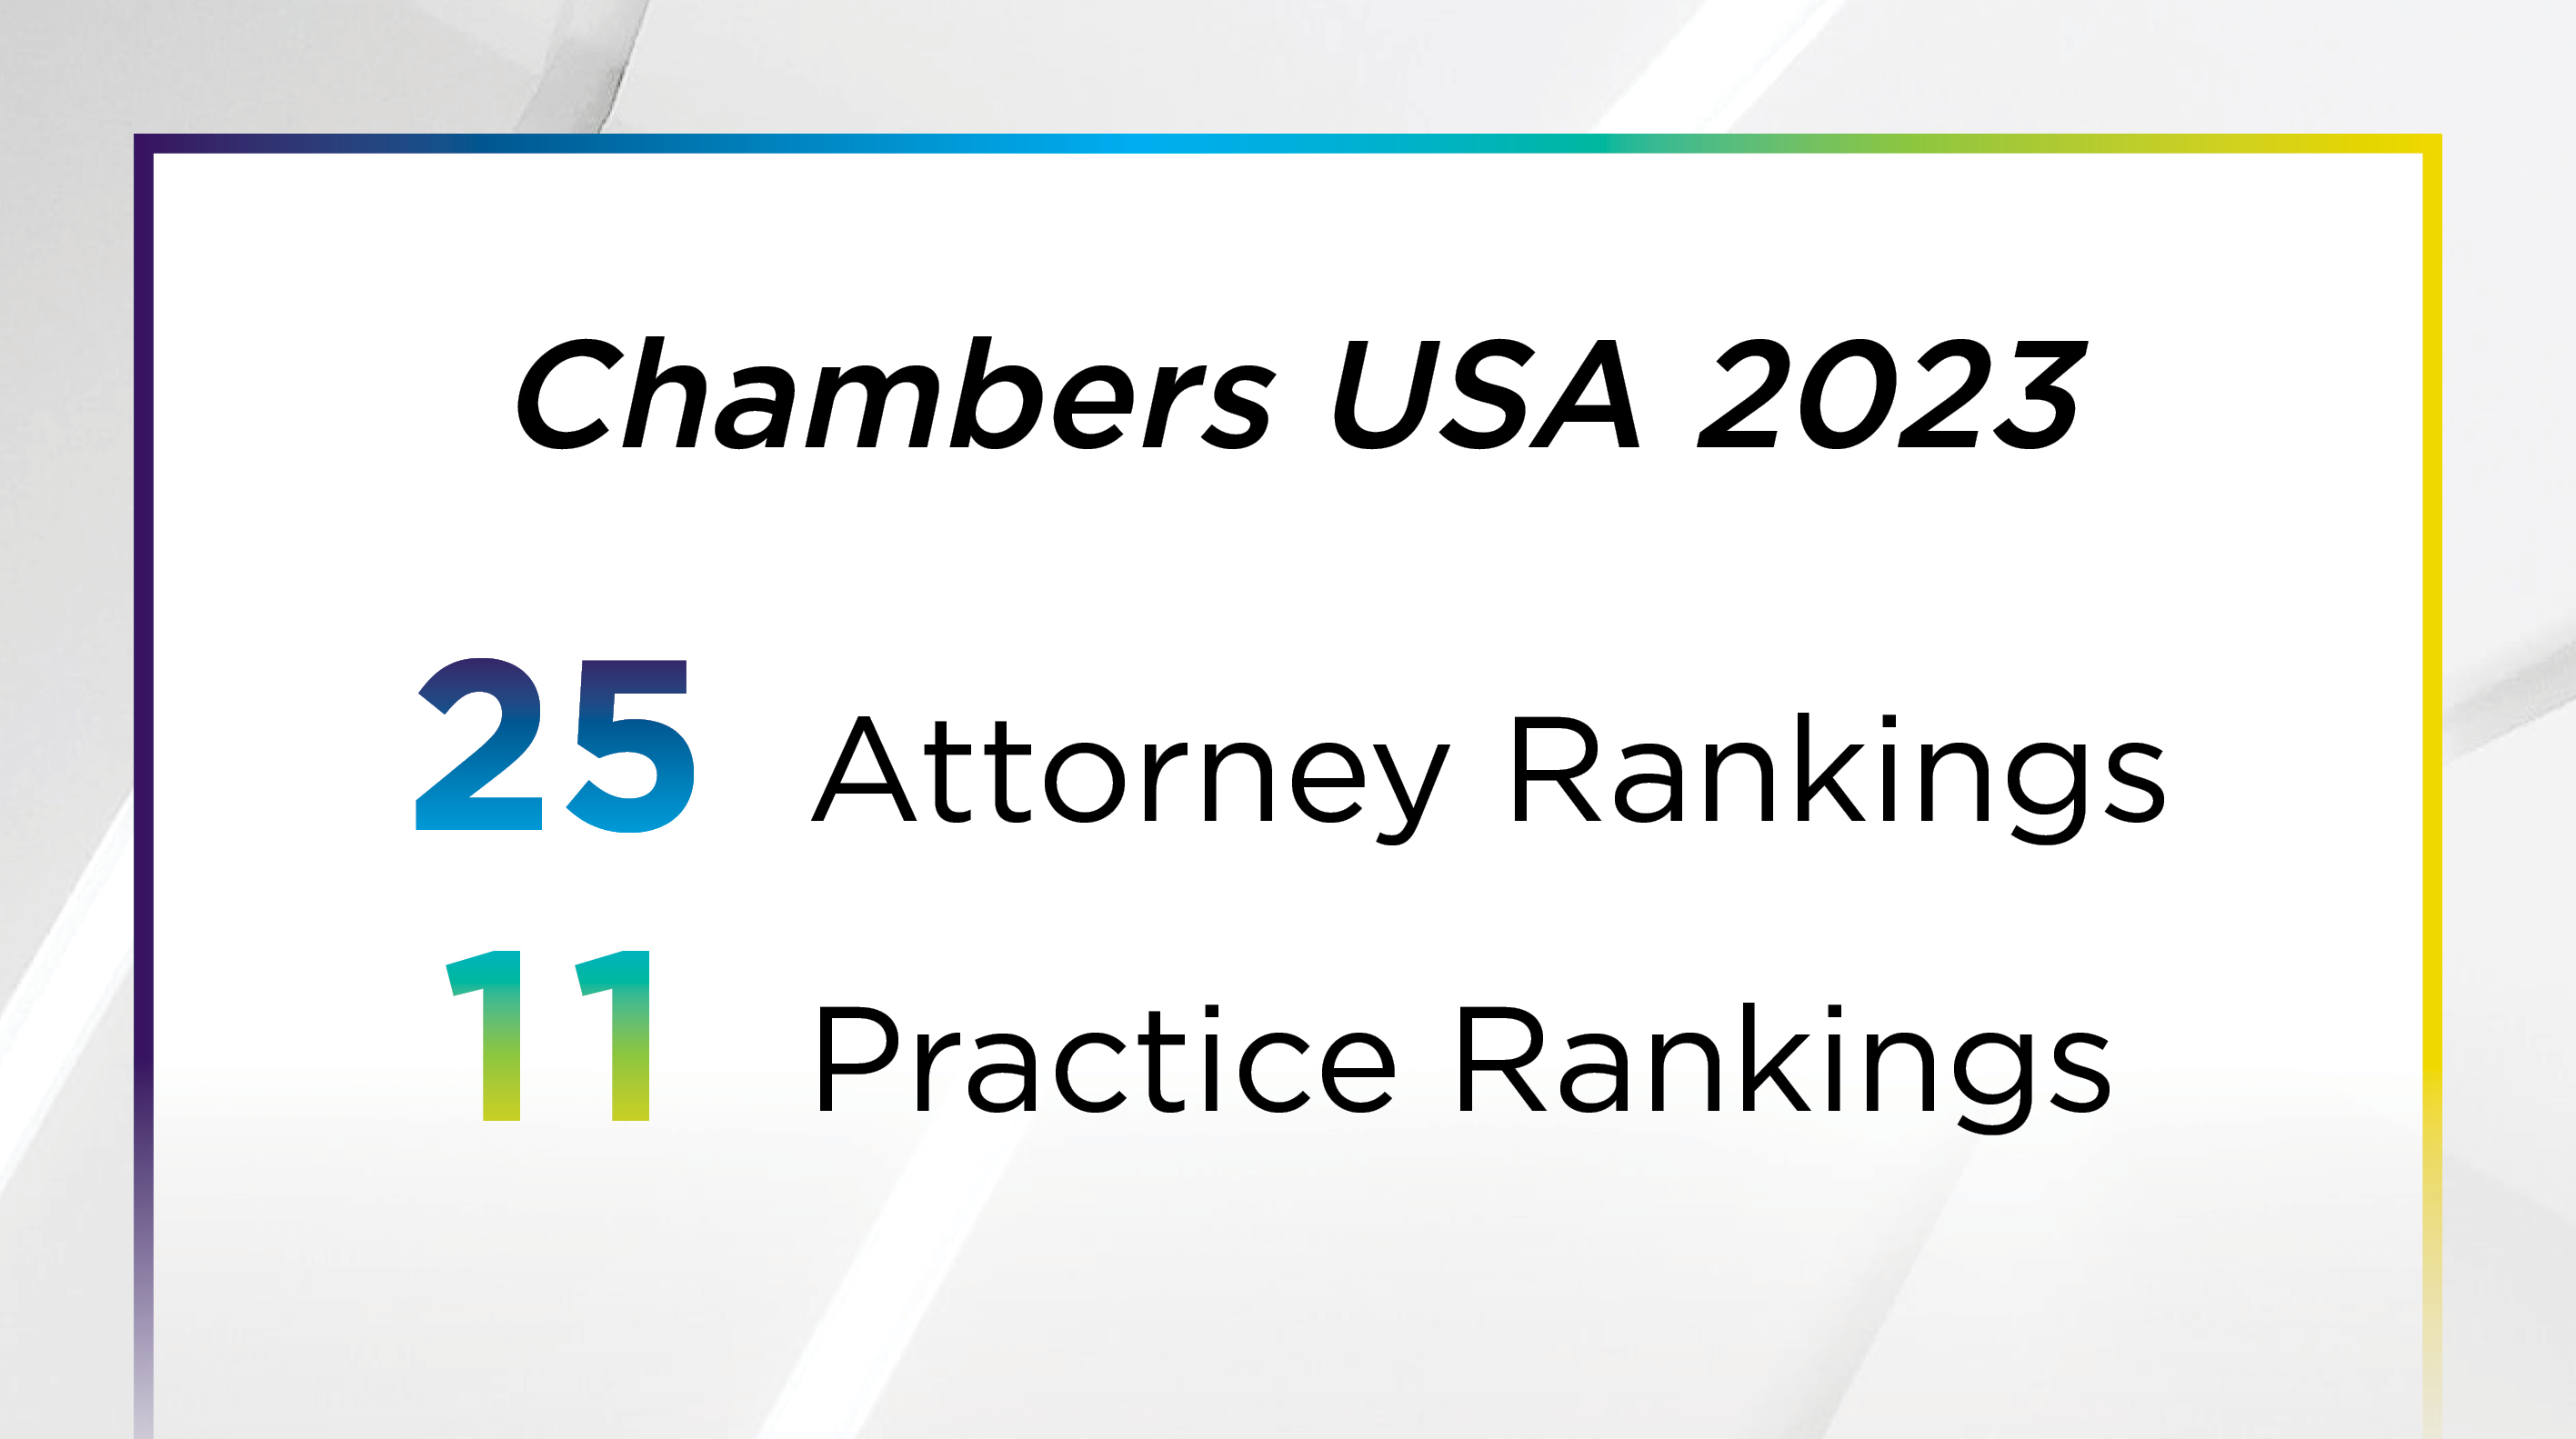 Michael Best Recognized in Chambers USA 2023 Photo